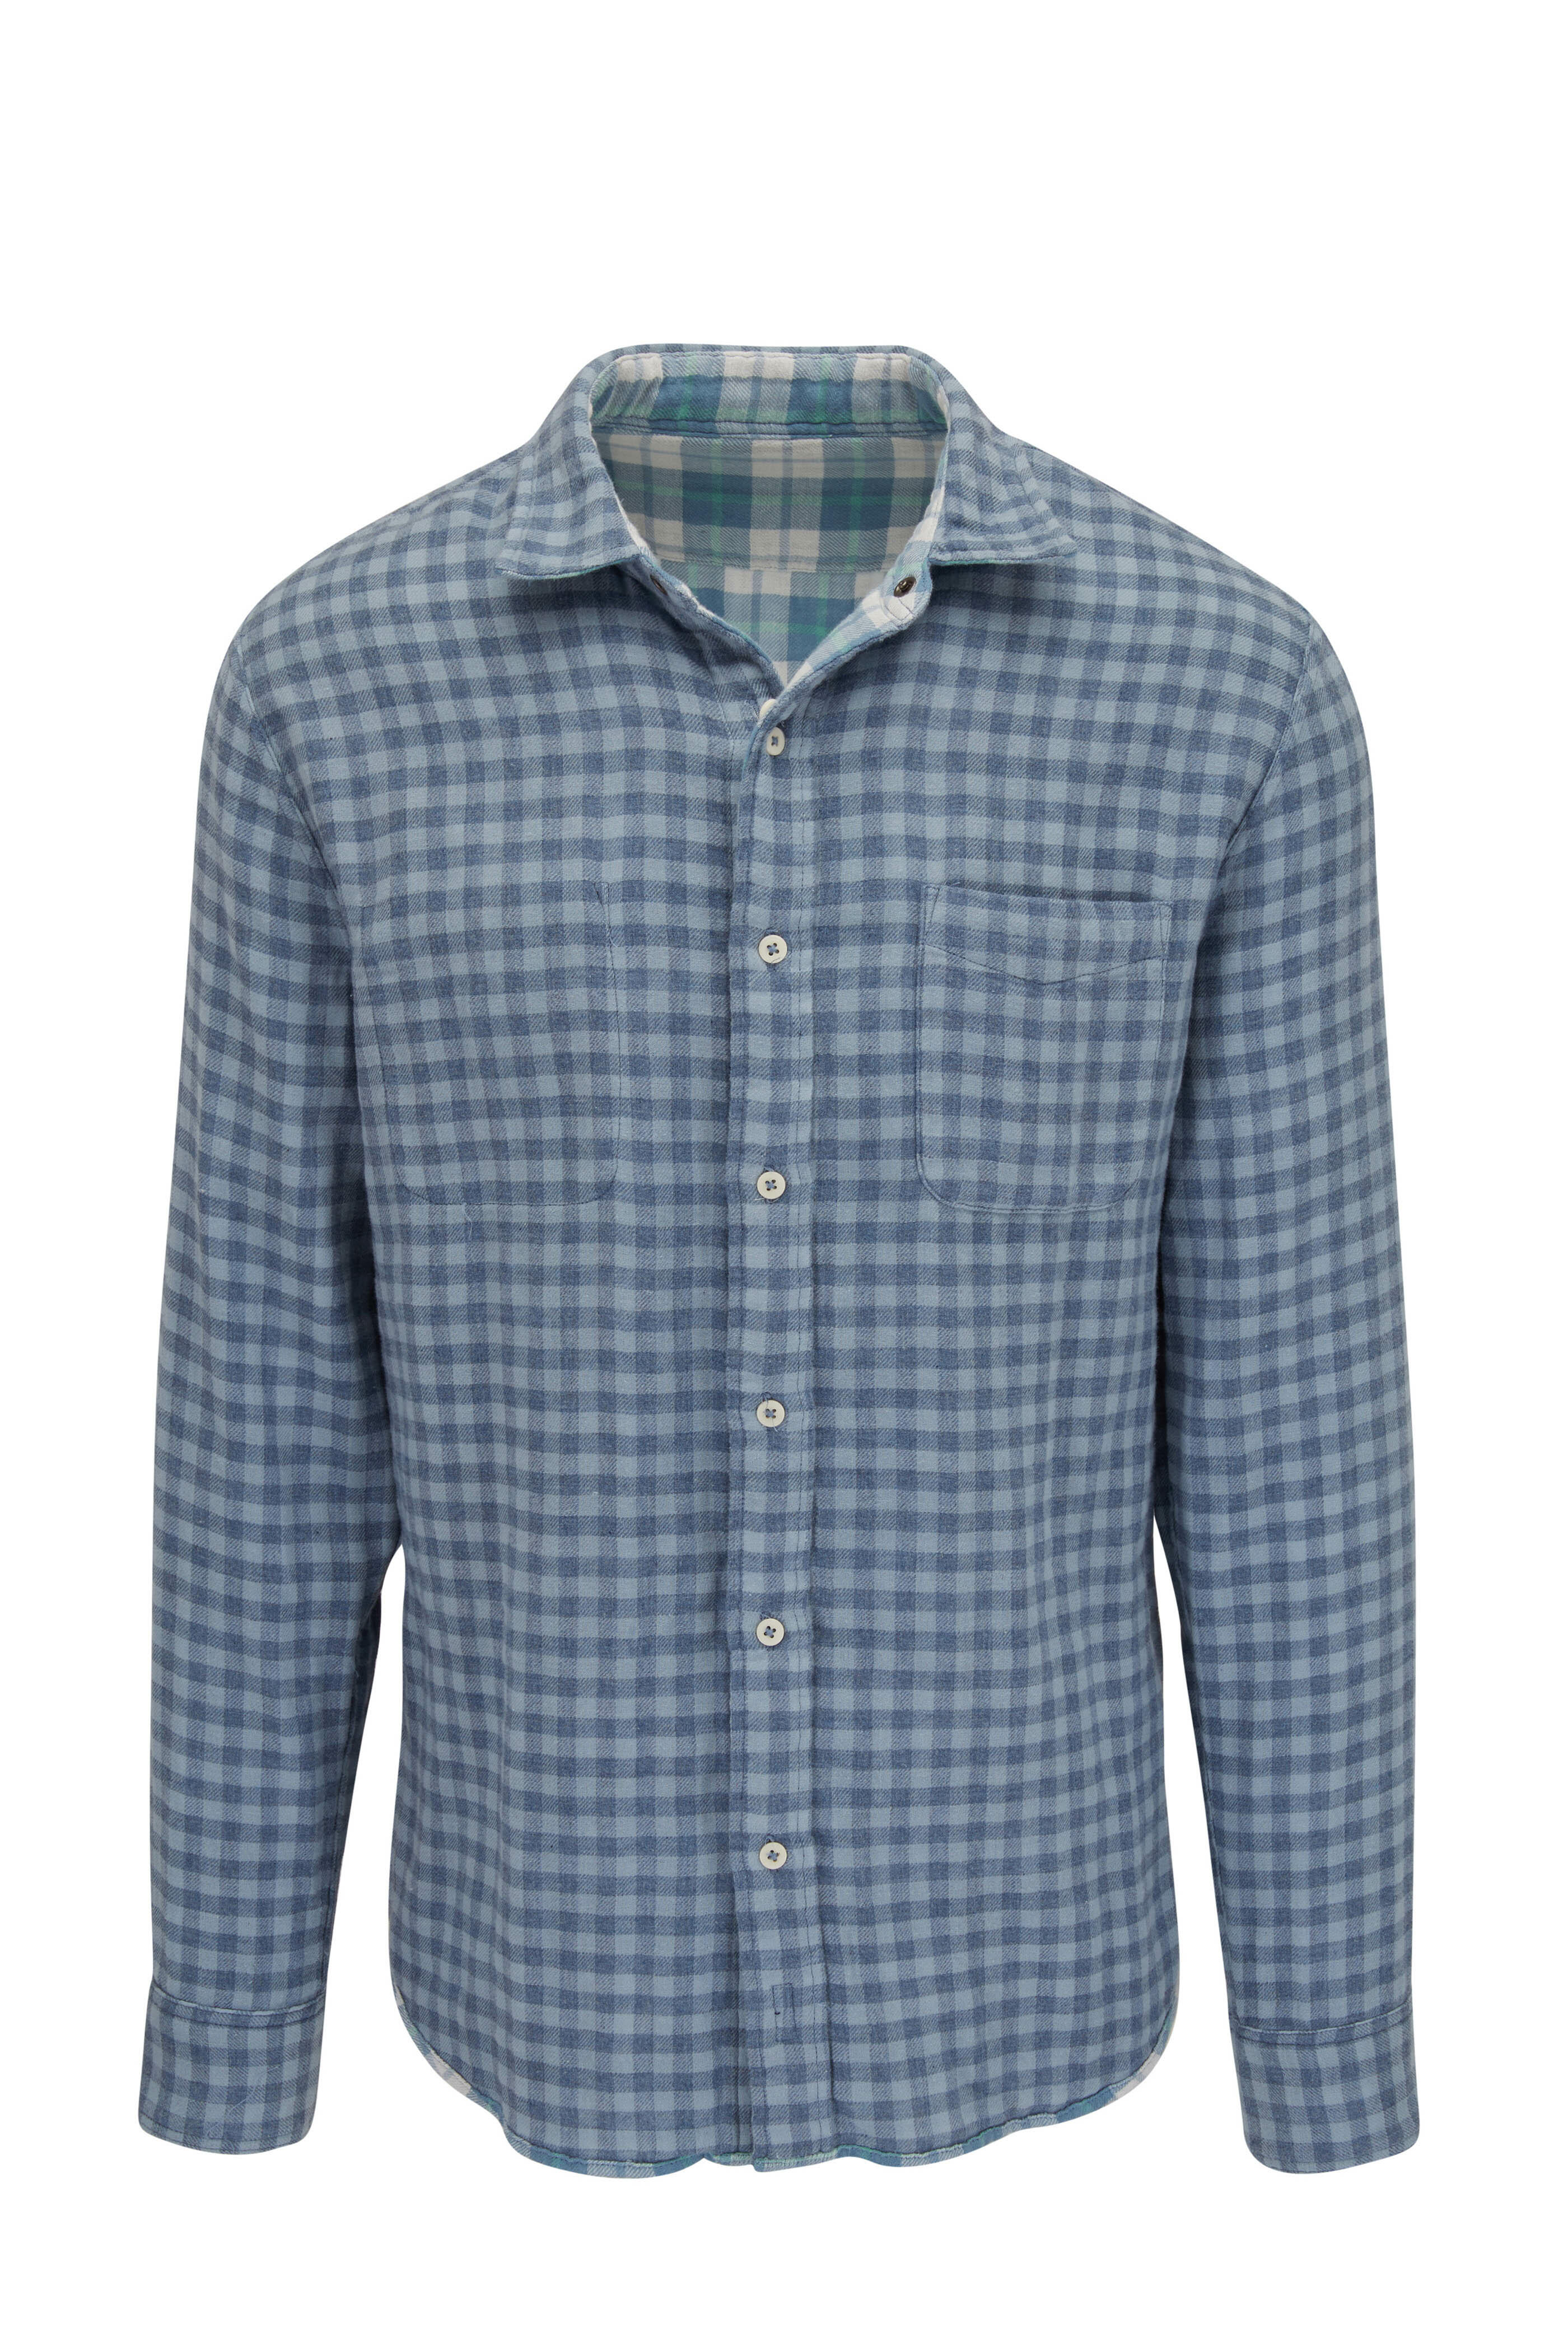 Buy Faherty Brand The Reversible Plaid Shirt - Landing Cove Plaid At 30%  Off